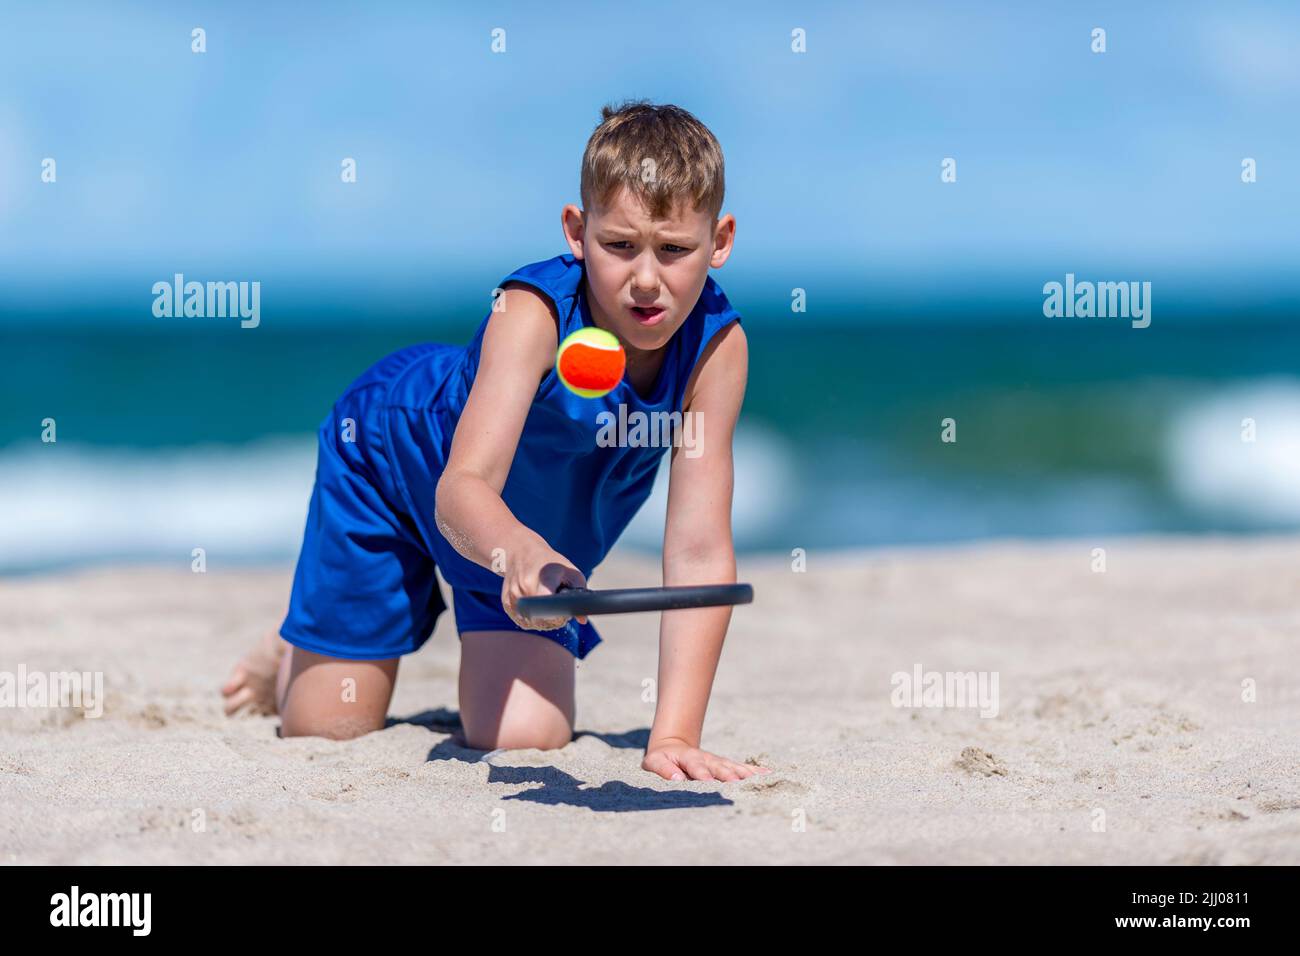 Young boy playing tennis on beach. Kids sport concept. Horizontal sport theme poster, greeting cards, headers, website and app Stock Photo